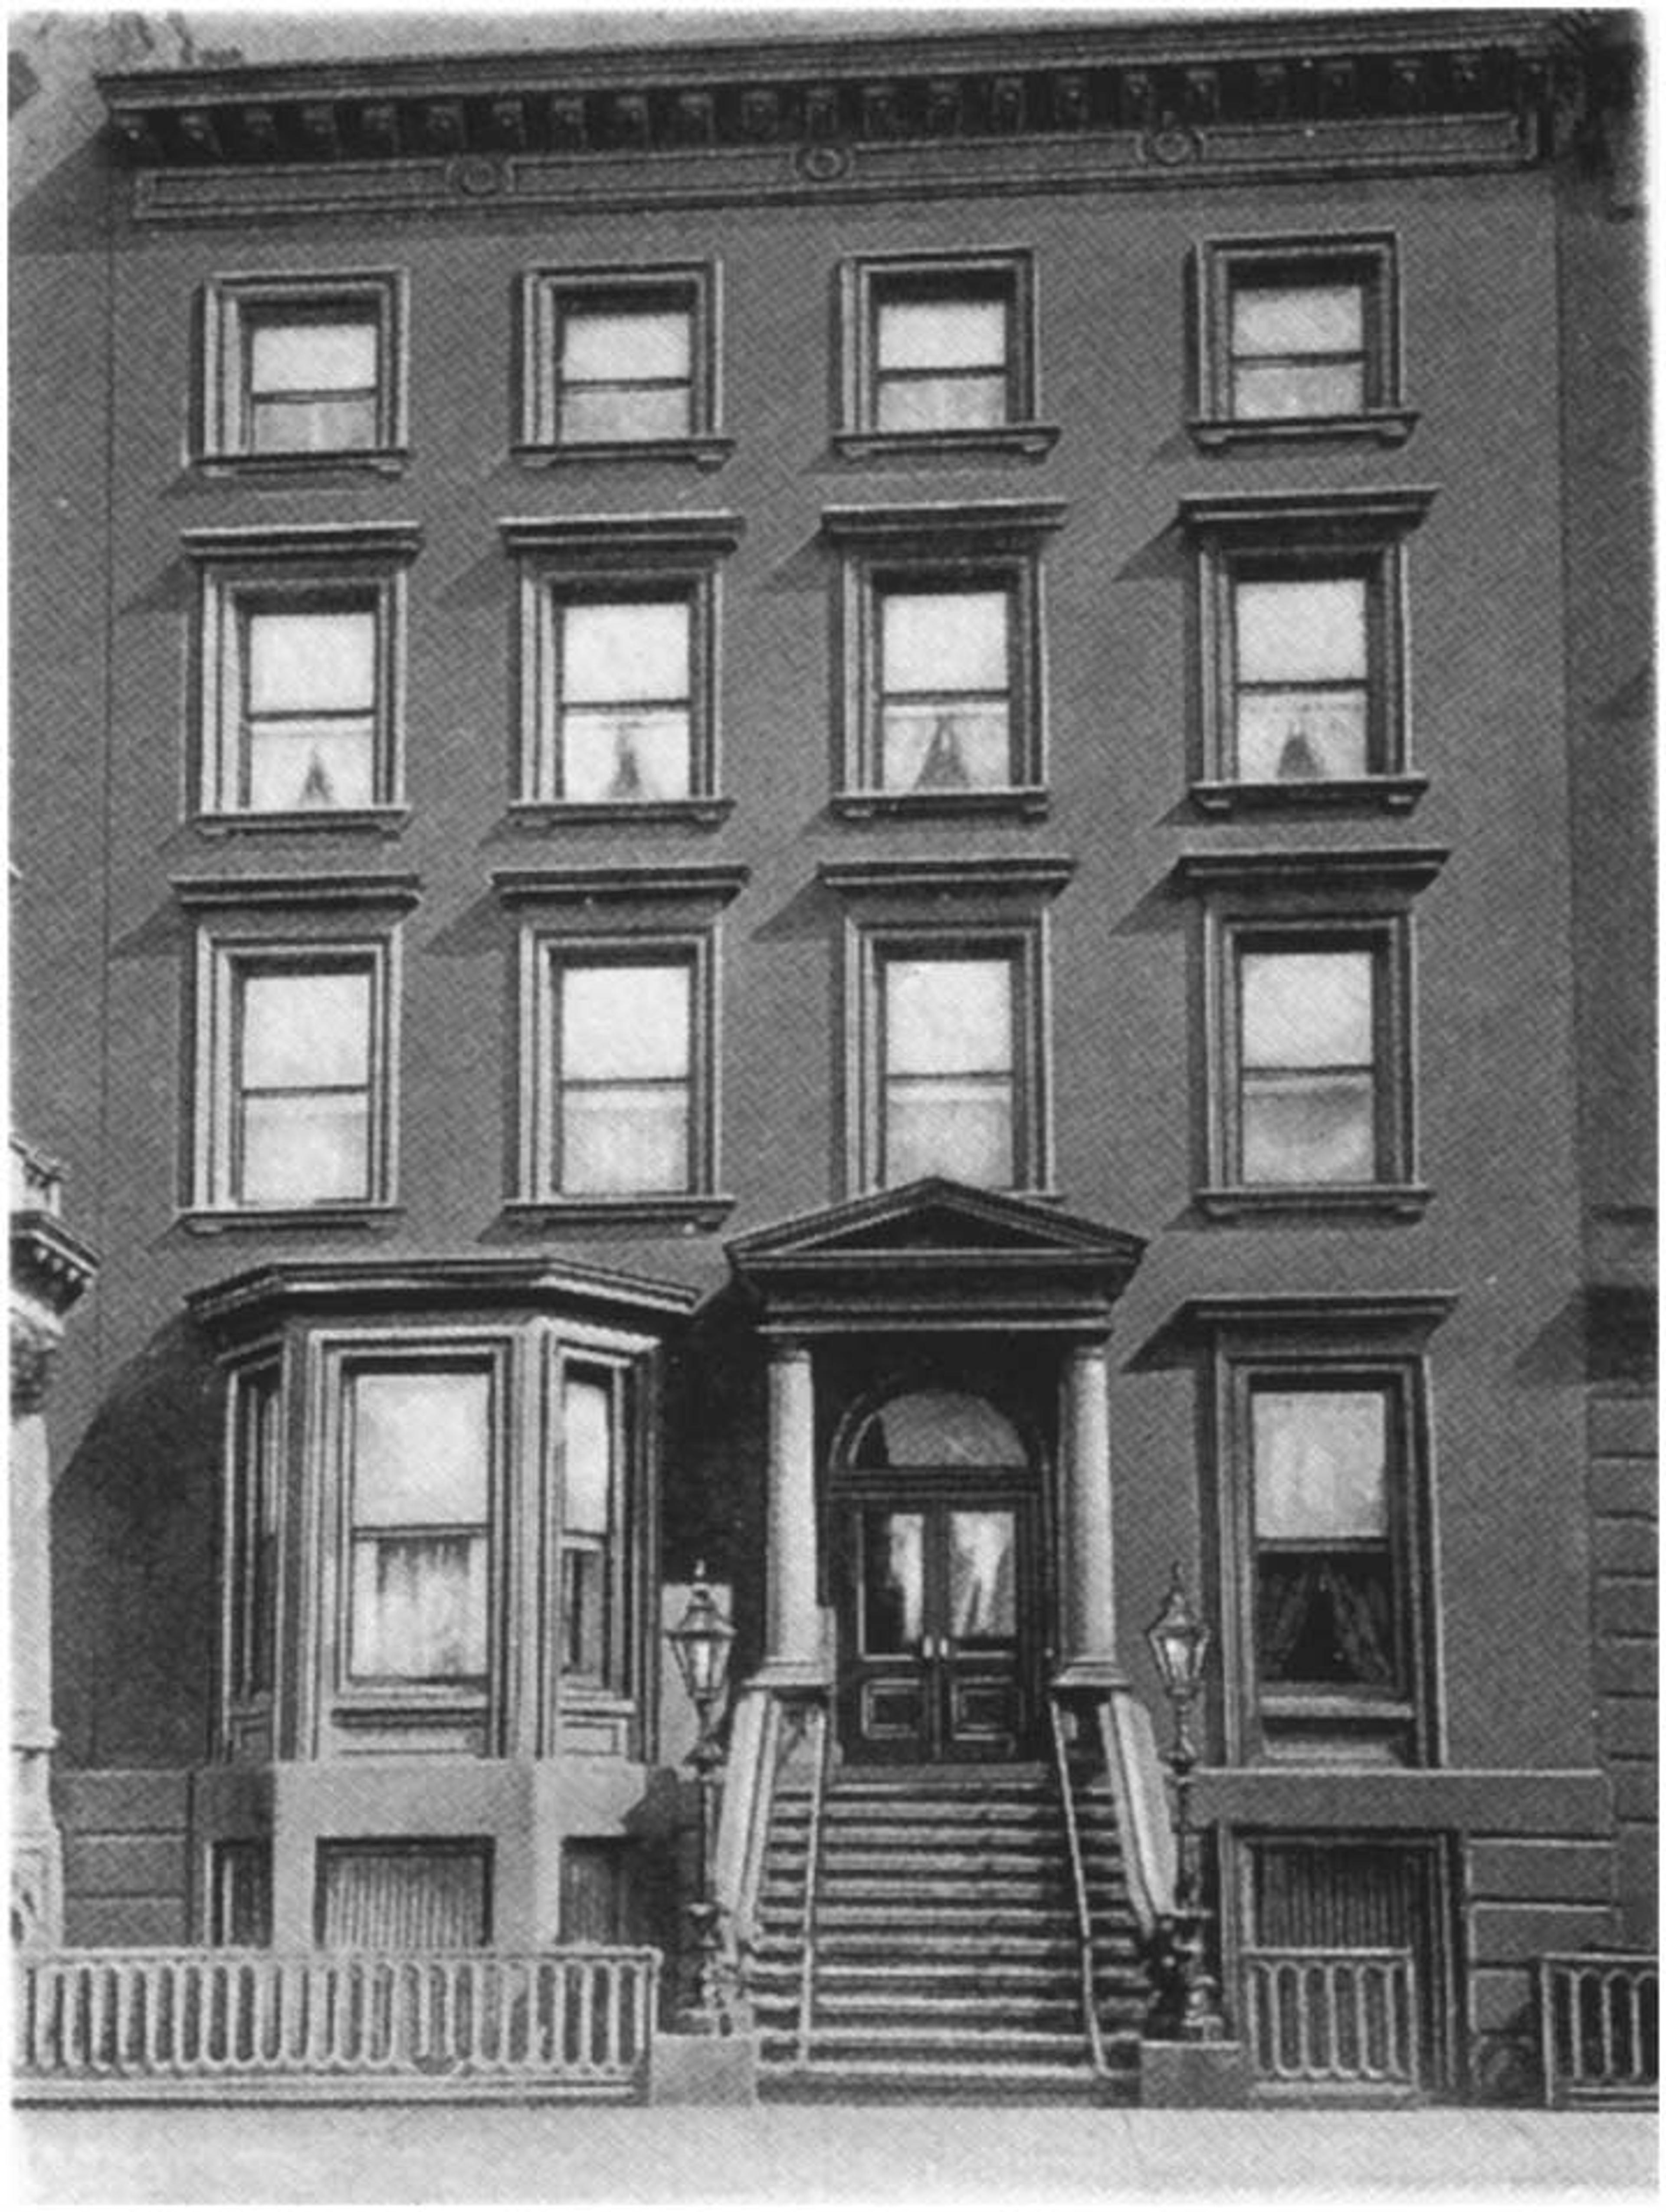 Image of The Met Row House